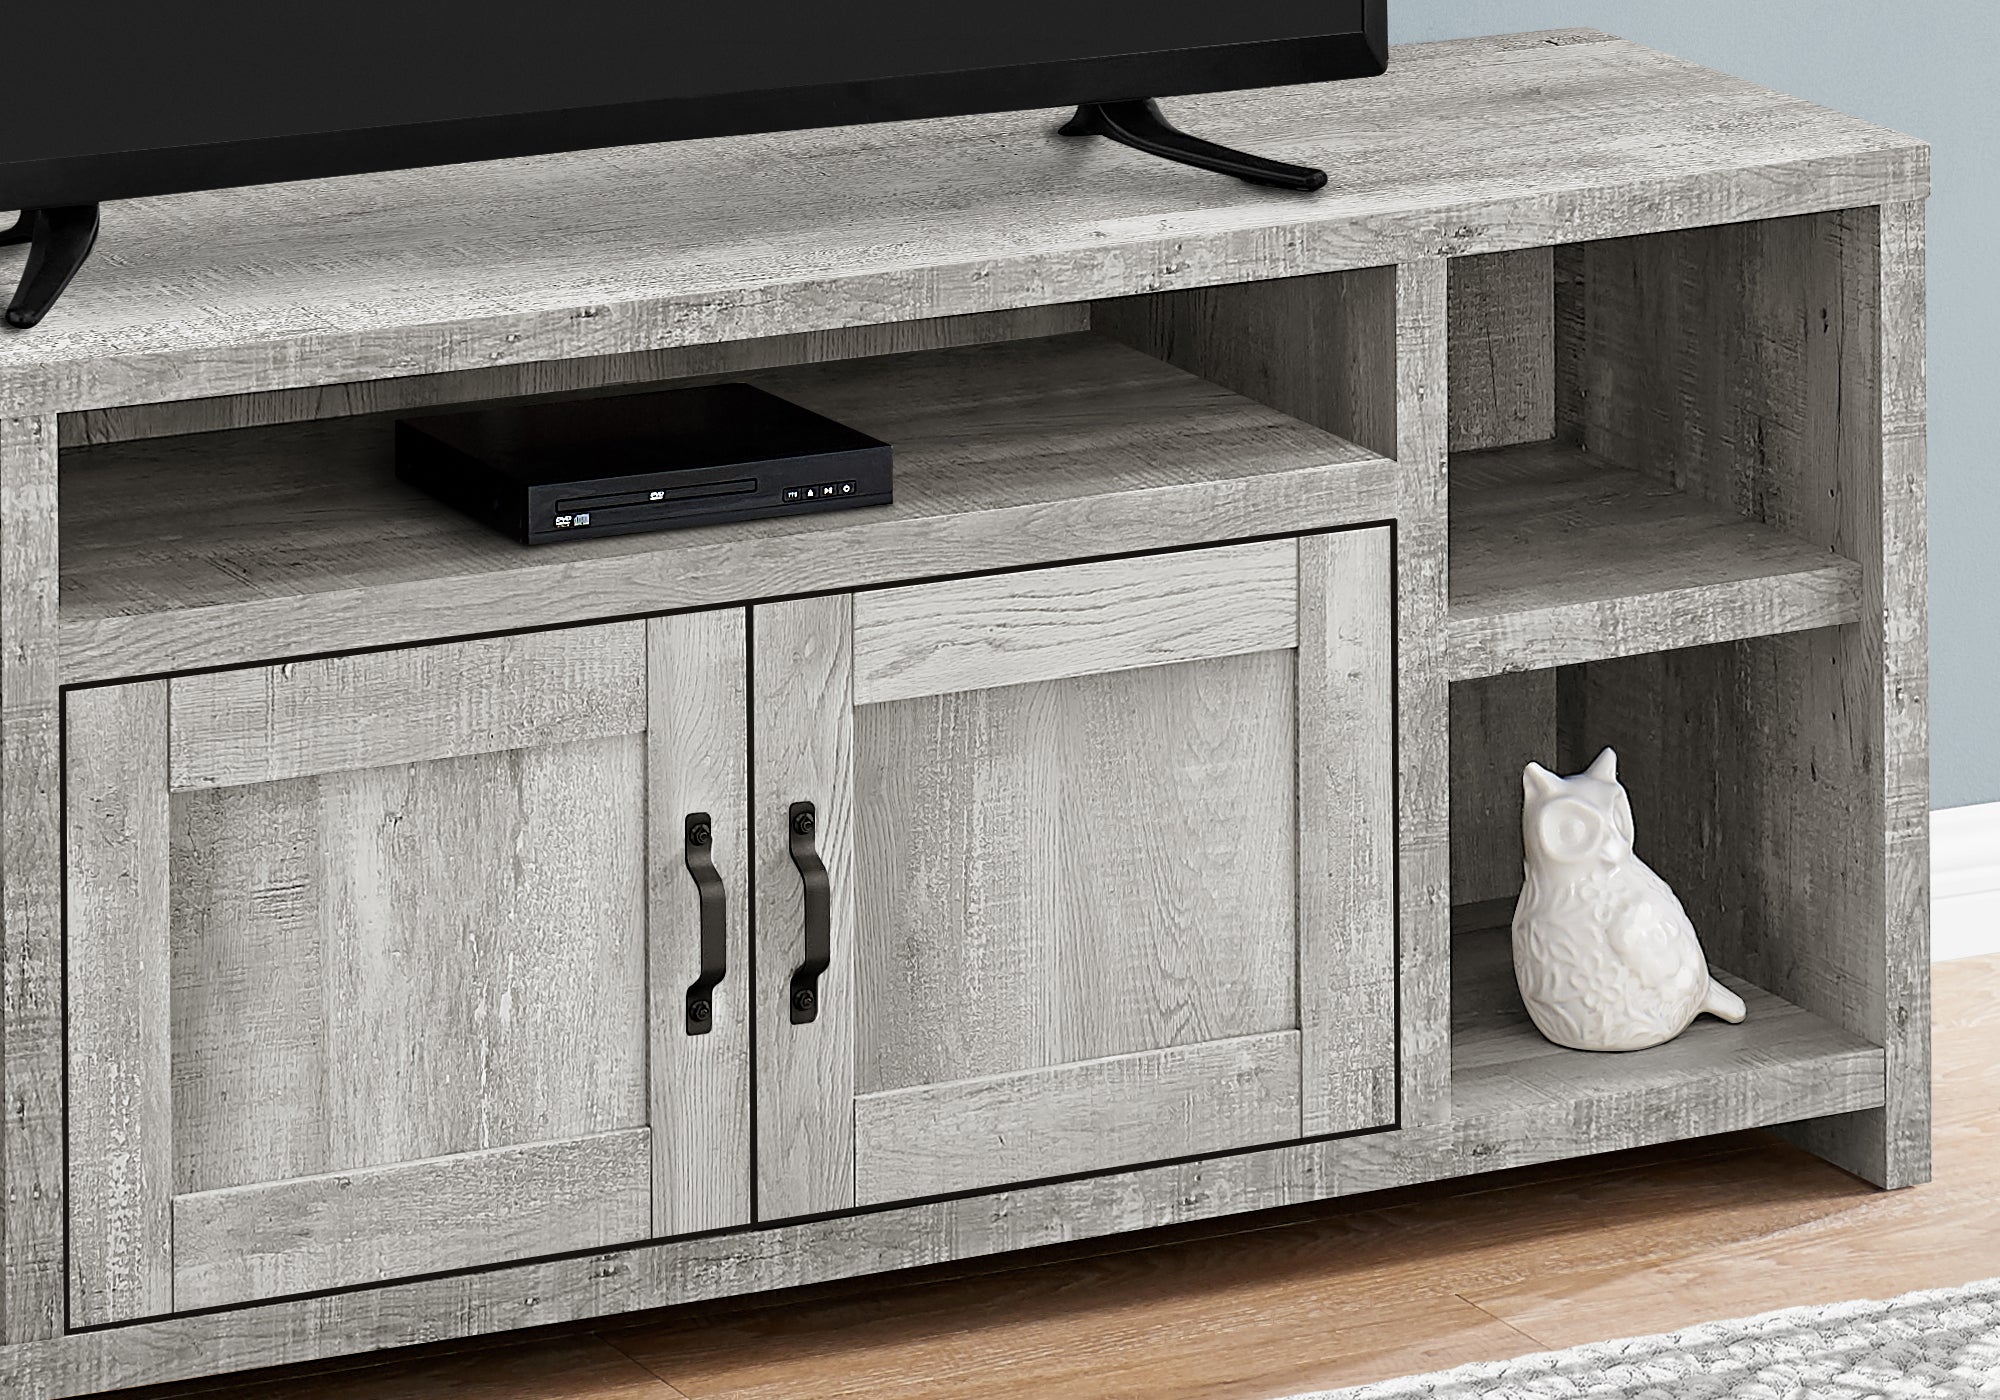 I 2741 - TV STAND - 60"L / GREY RECLAIMED WOOD-LOOK BY MONARCH SPECIALTIES INC